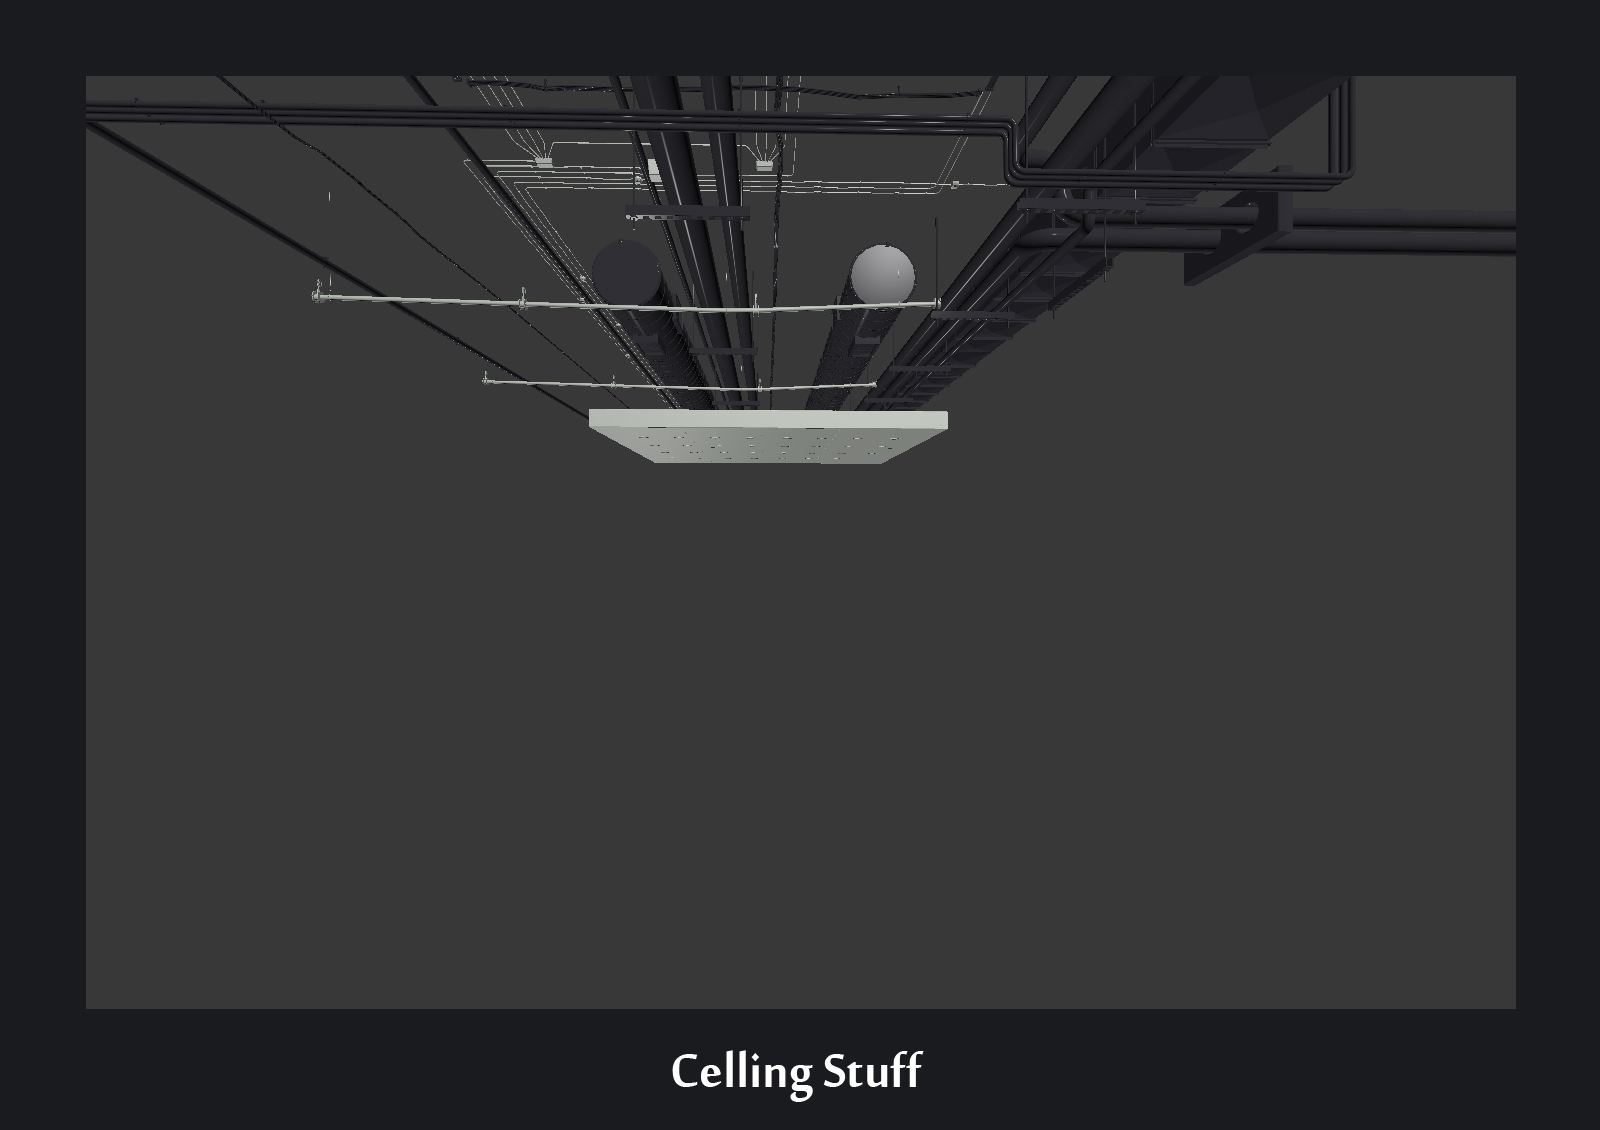 007_Celling_Stuff_evermotion_043.jpg